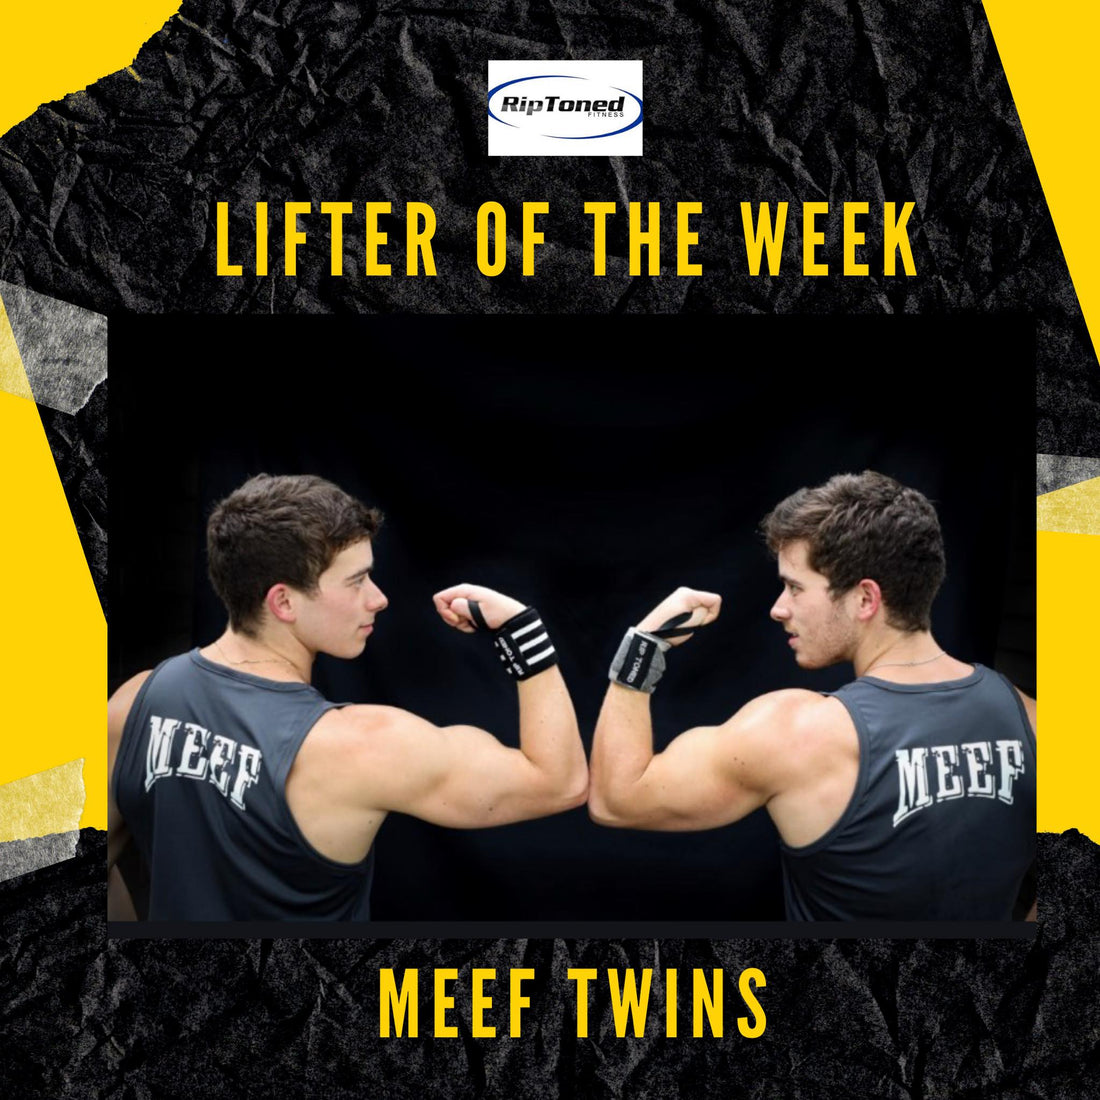 Lifter of the Week - Meef Twins - Rip Toned